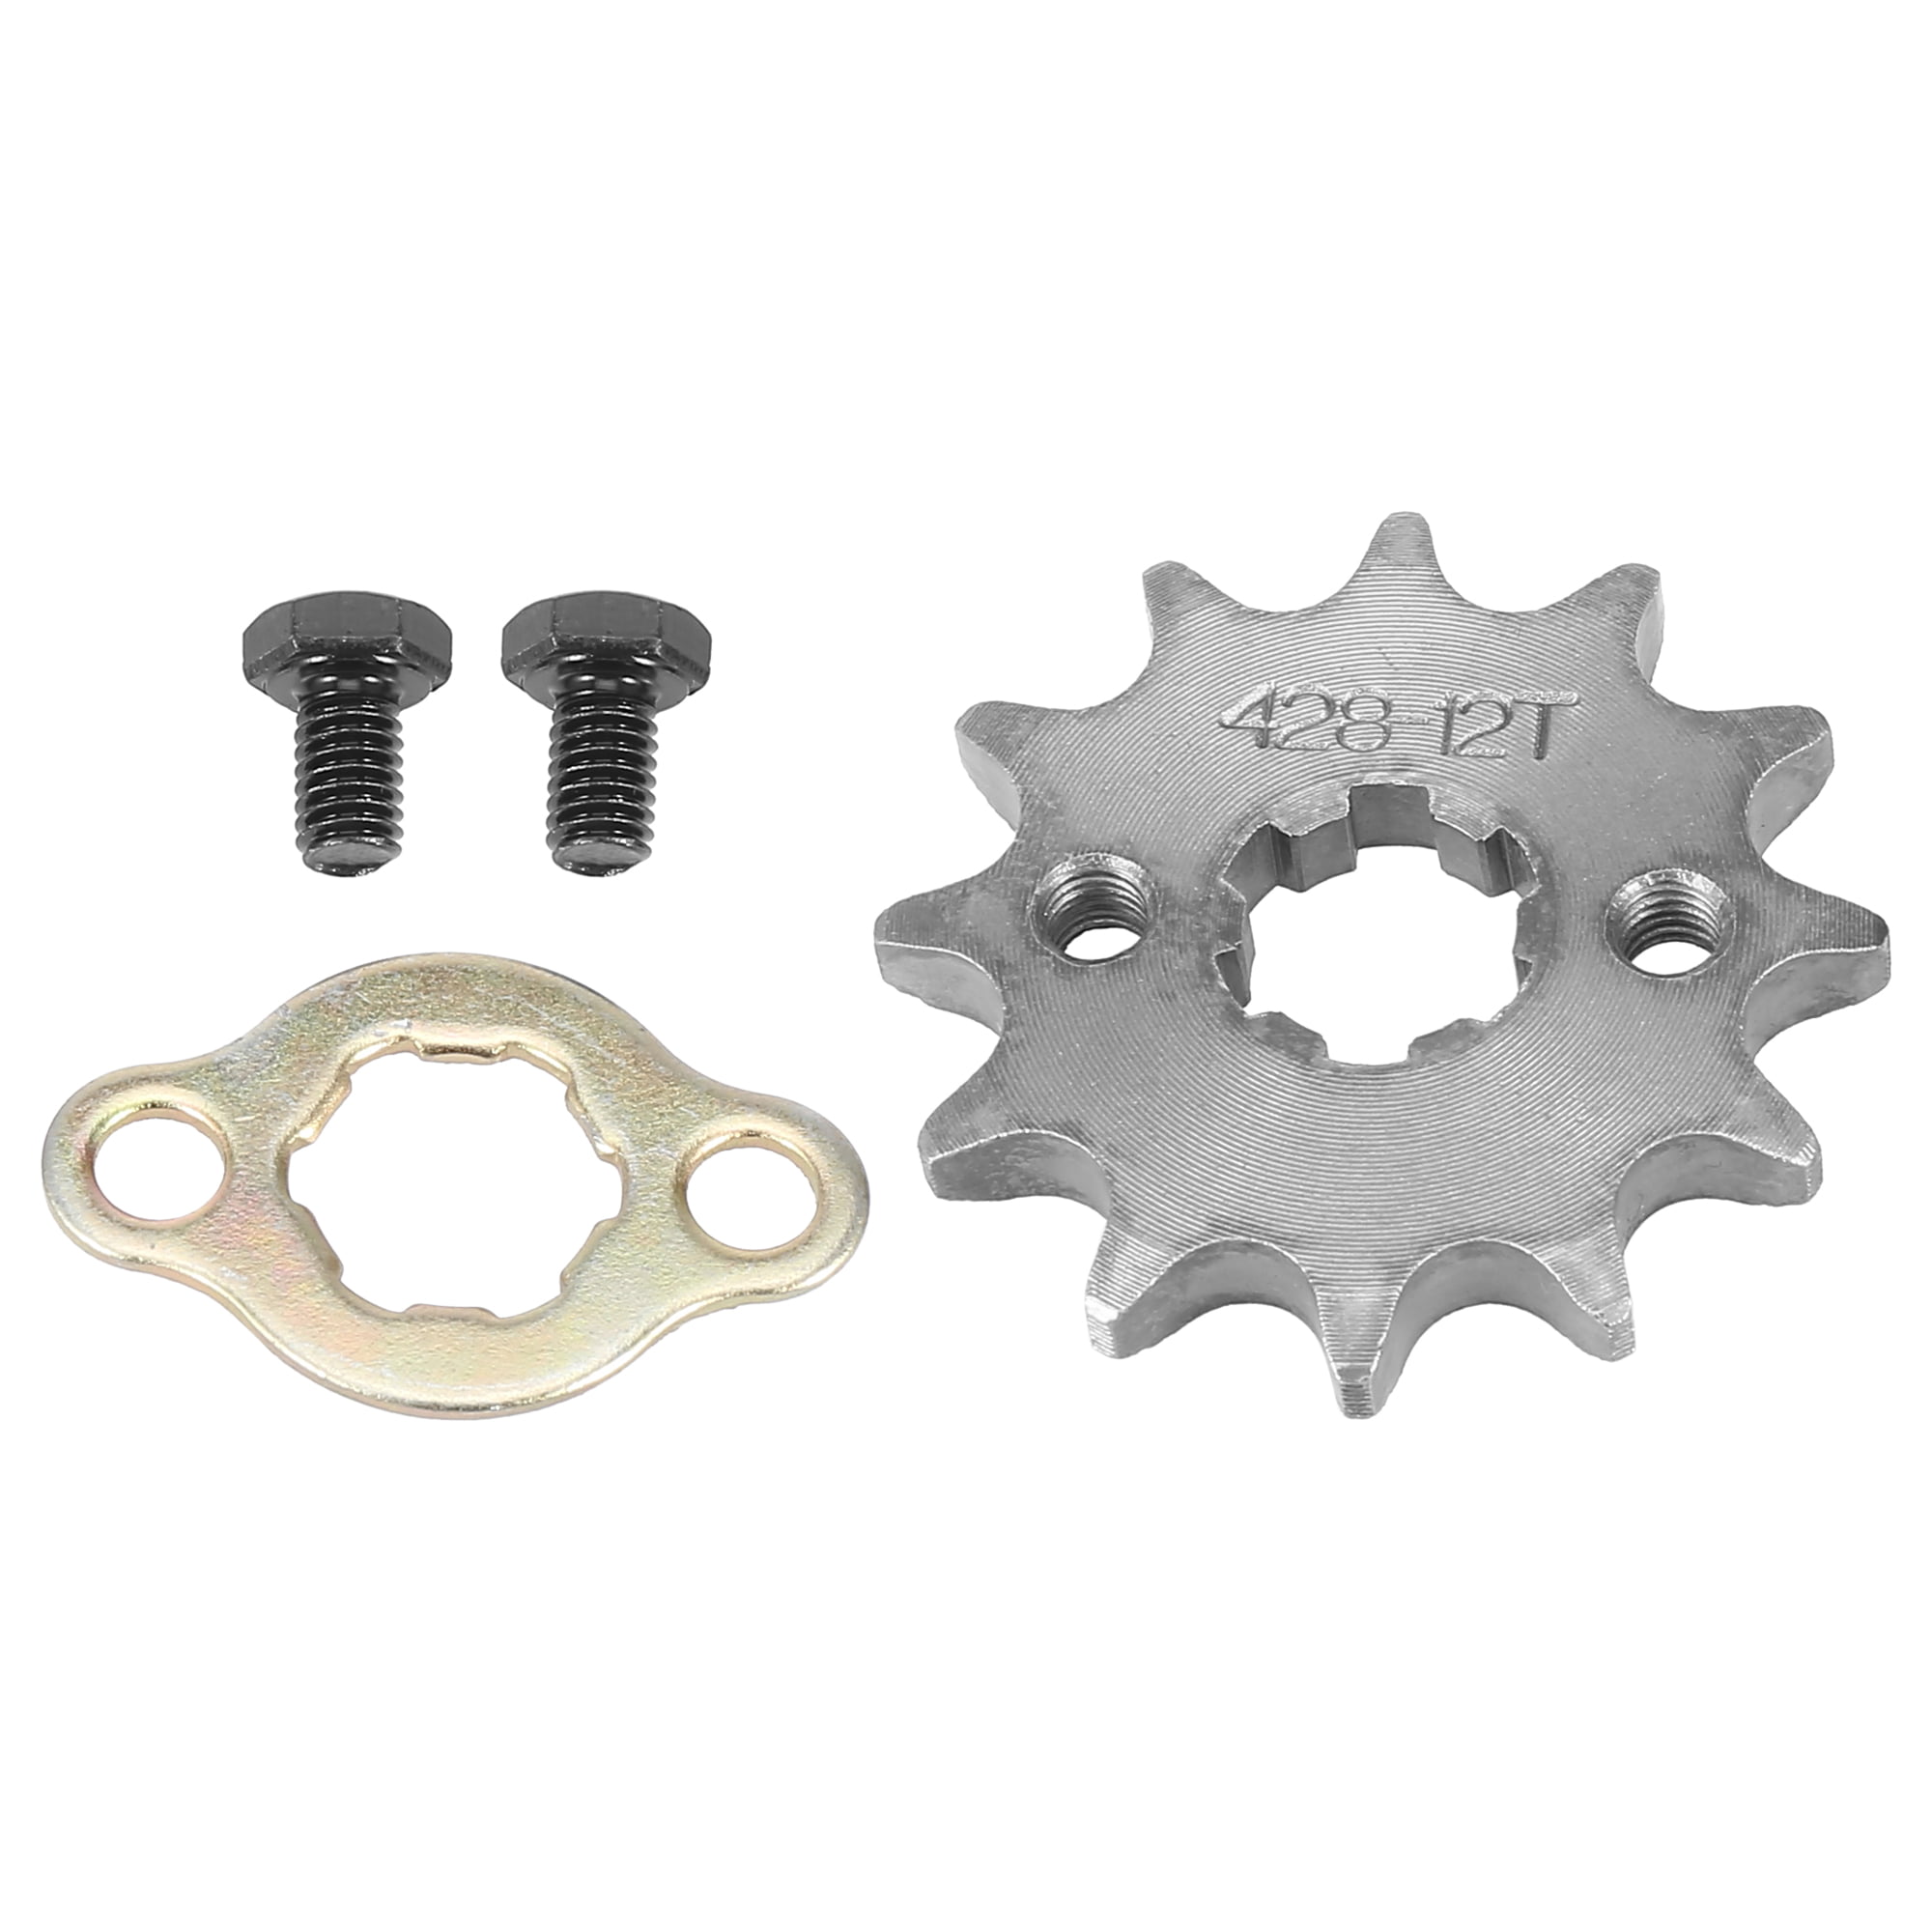 Chain 428 12 Tooth Front Engine Sprocket Dirt  ATV Moped 17mm Shaft 